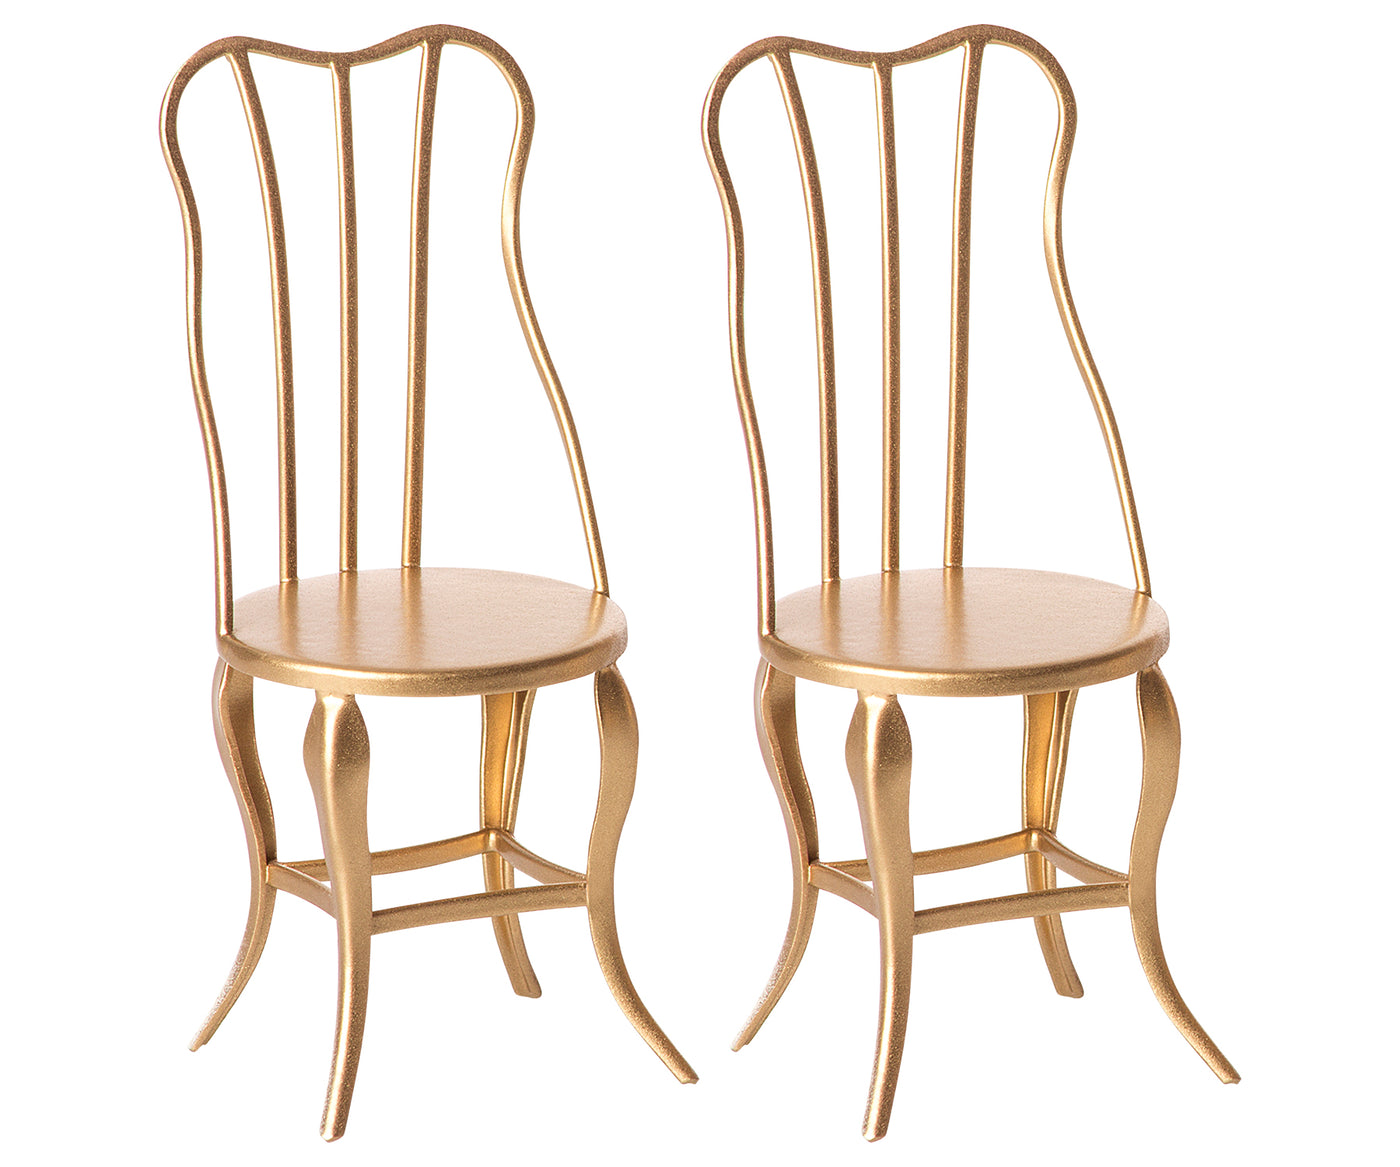 Maileg Vintage Chairs - Gold